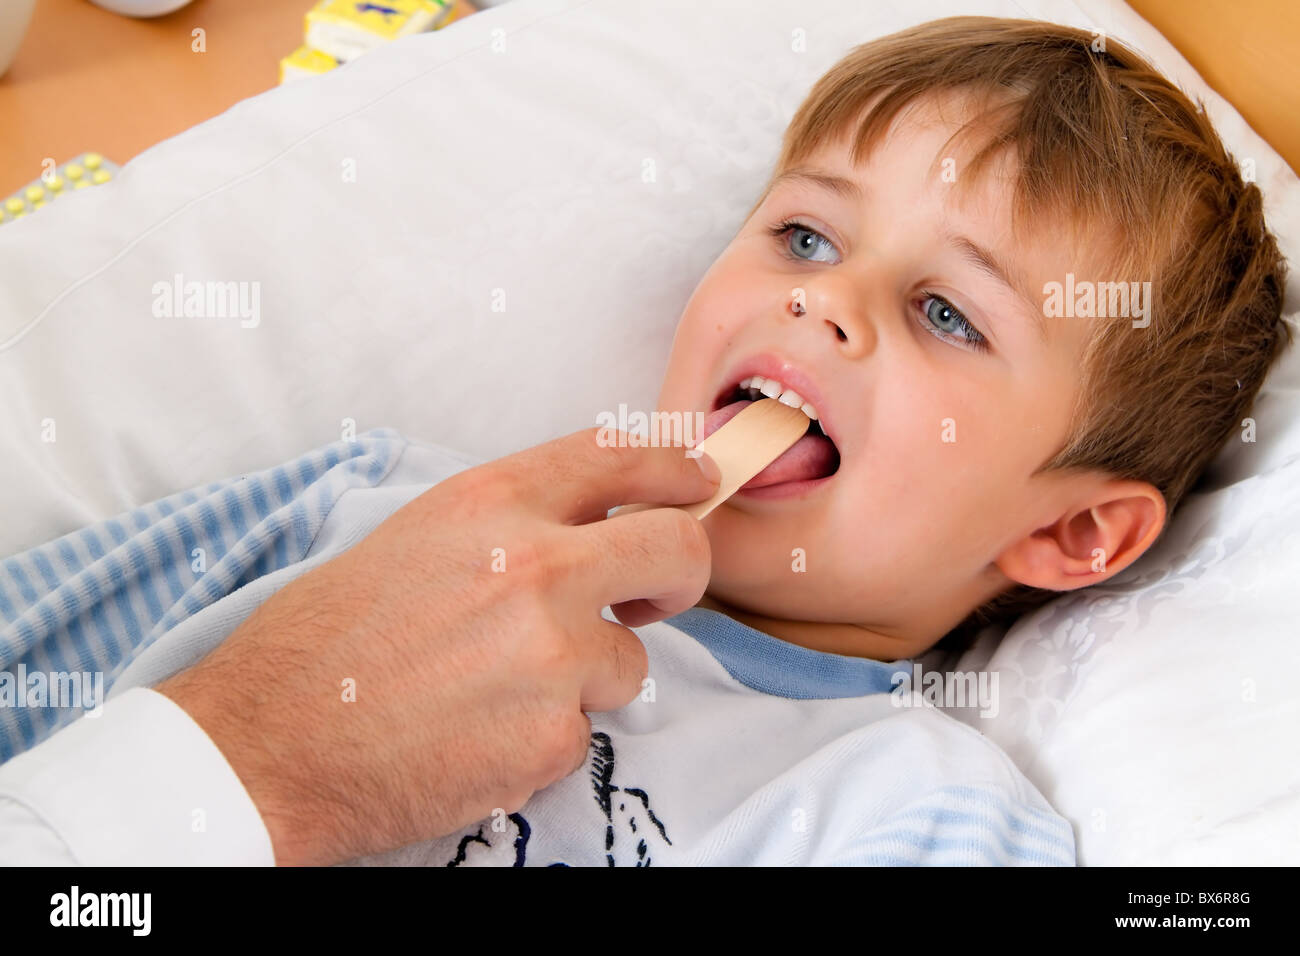 sick child in bed Stock Photo